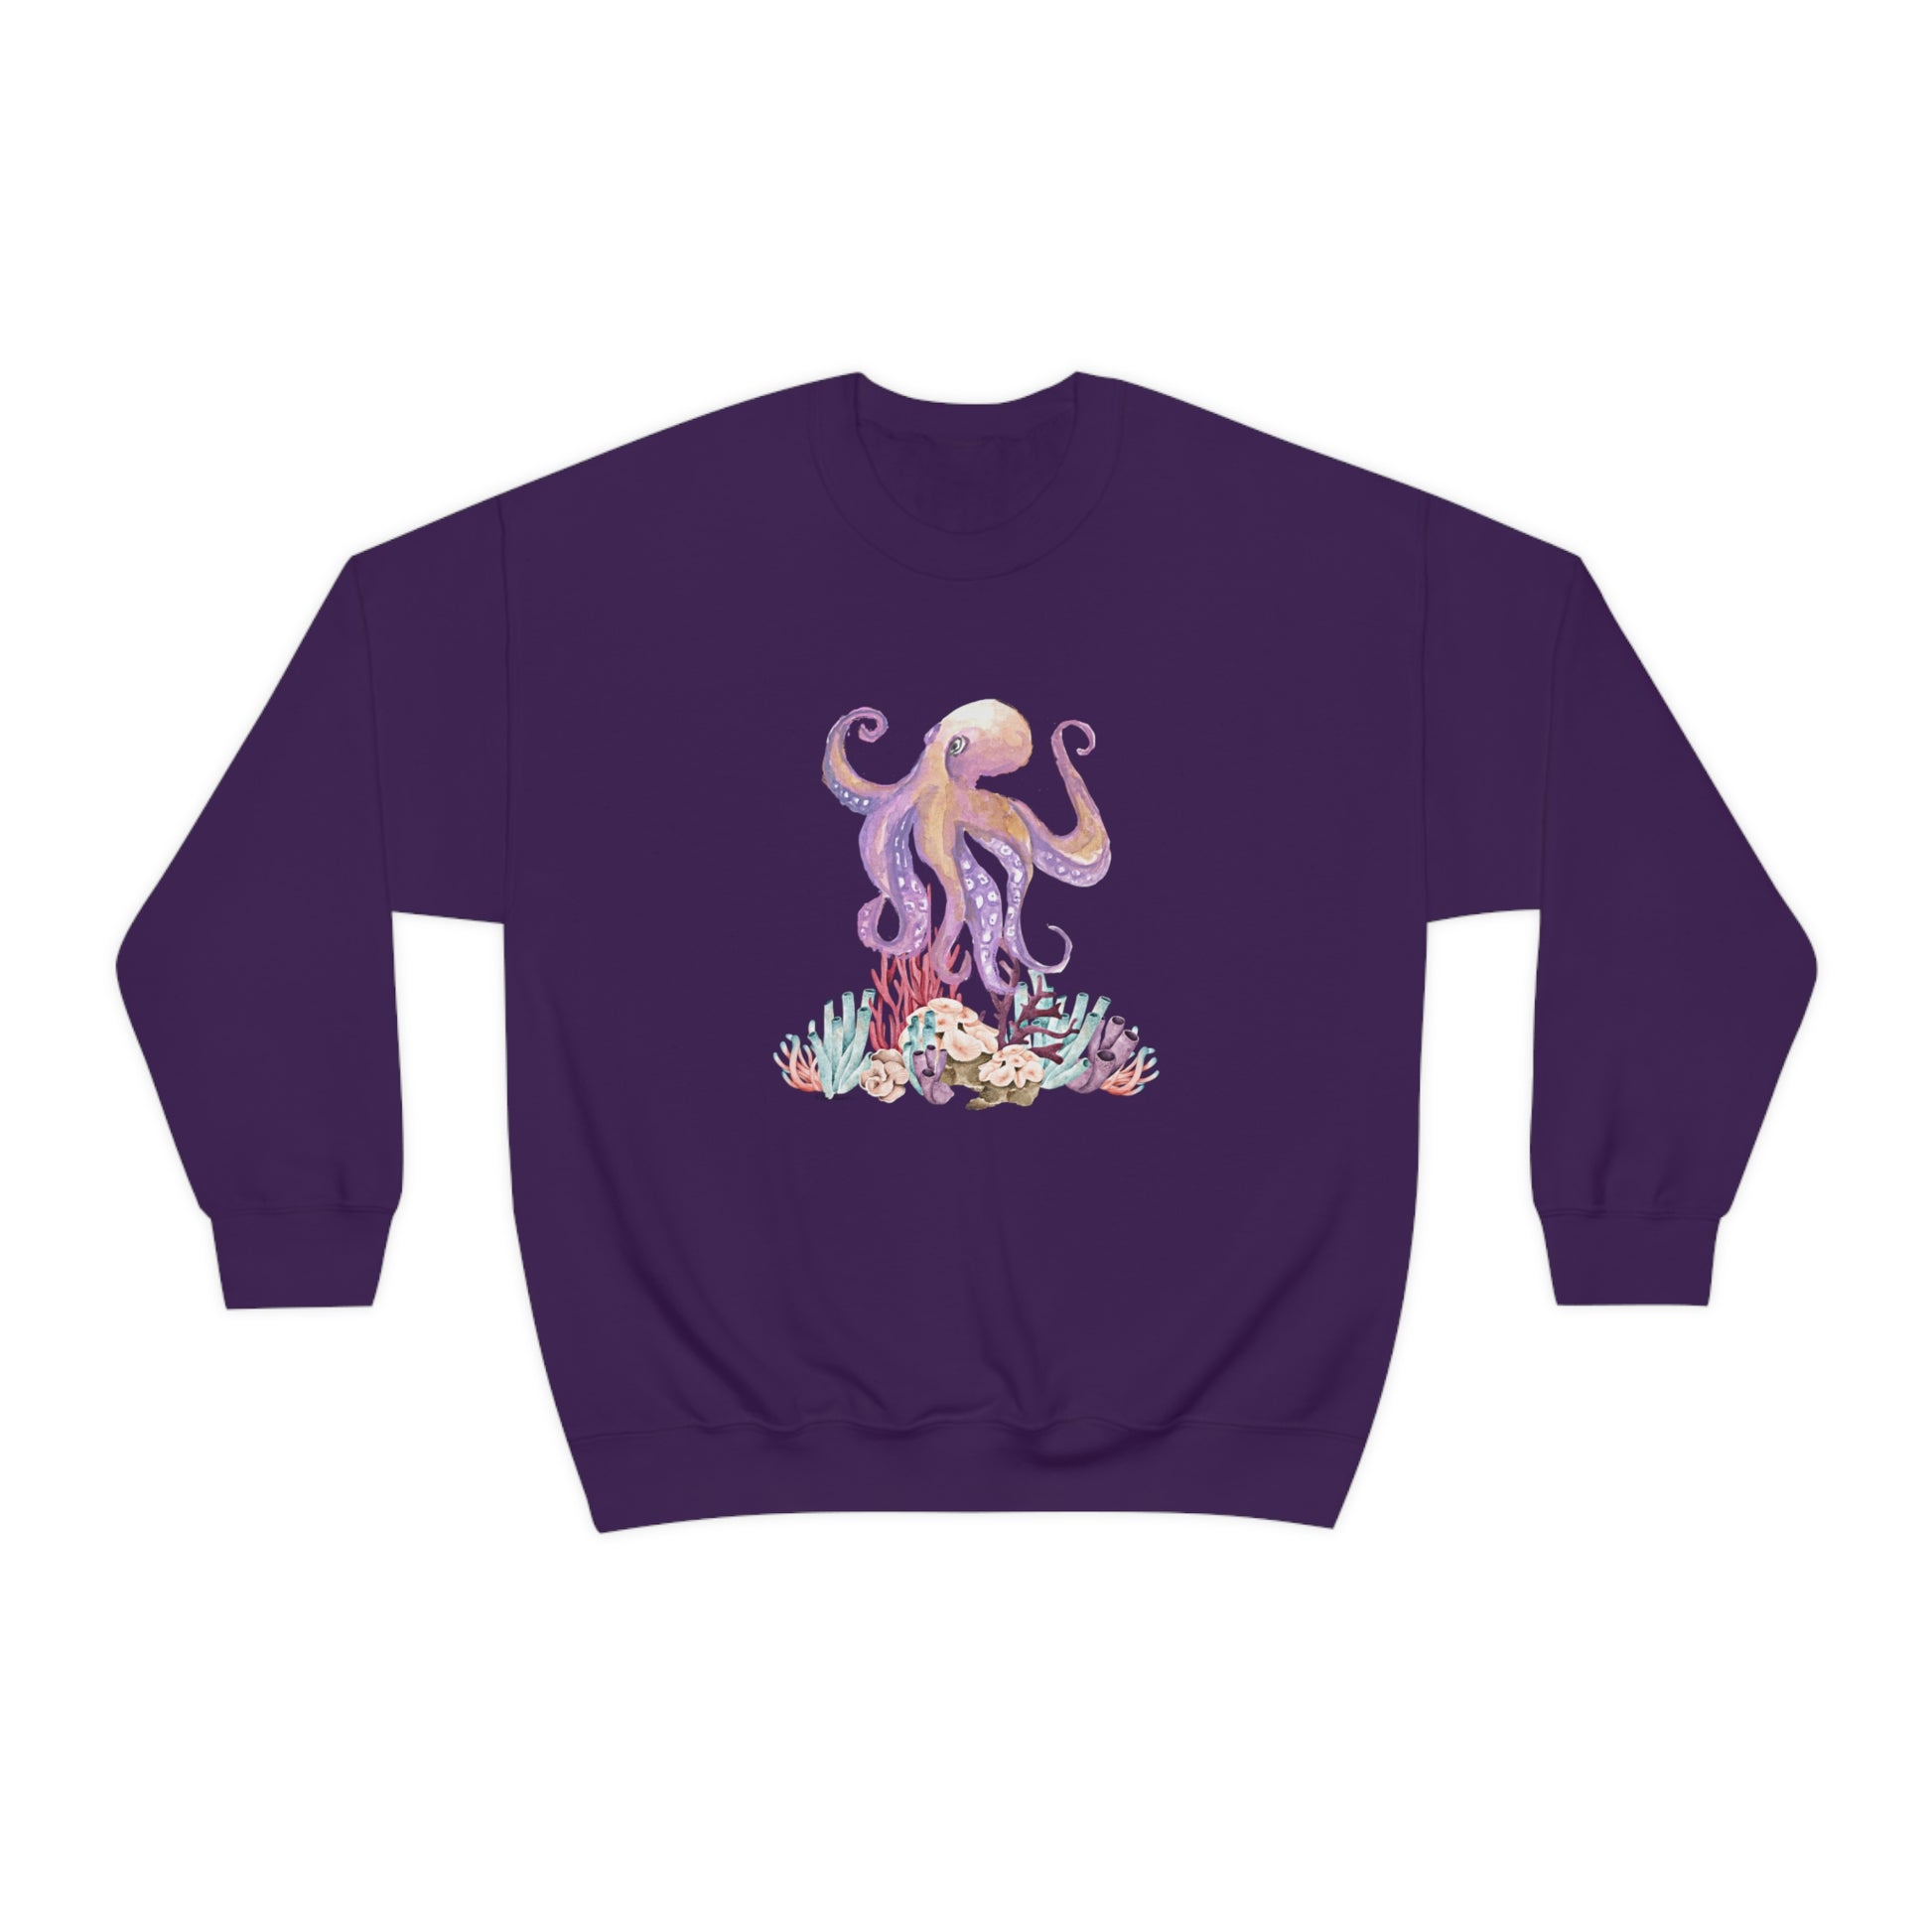 Flat front view of the Purple shirt